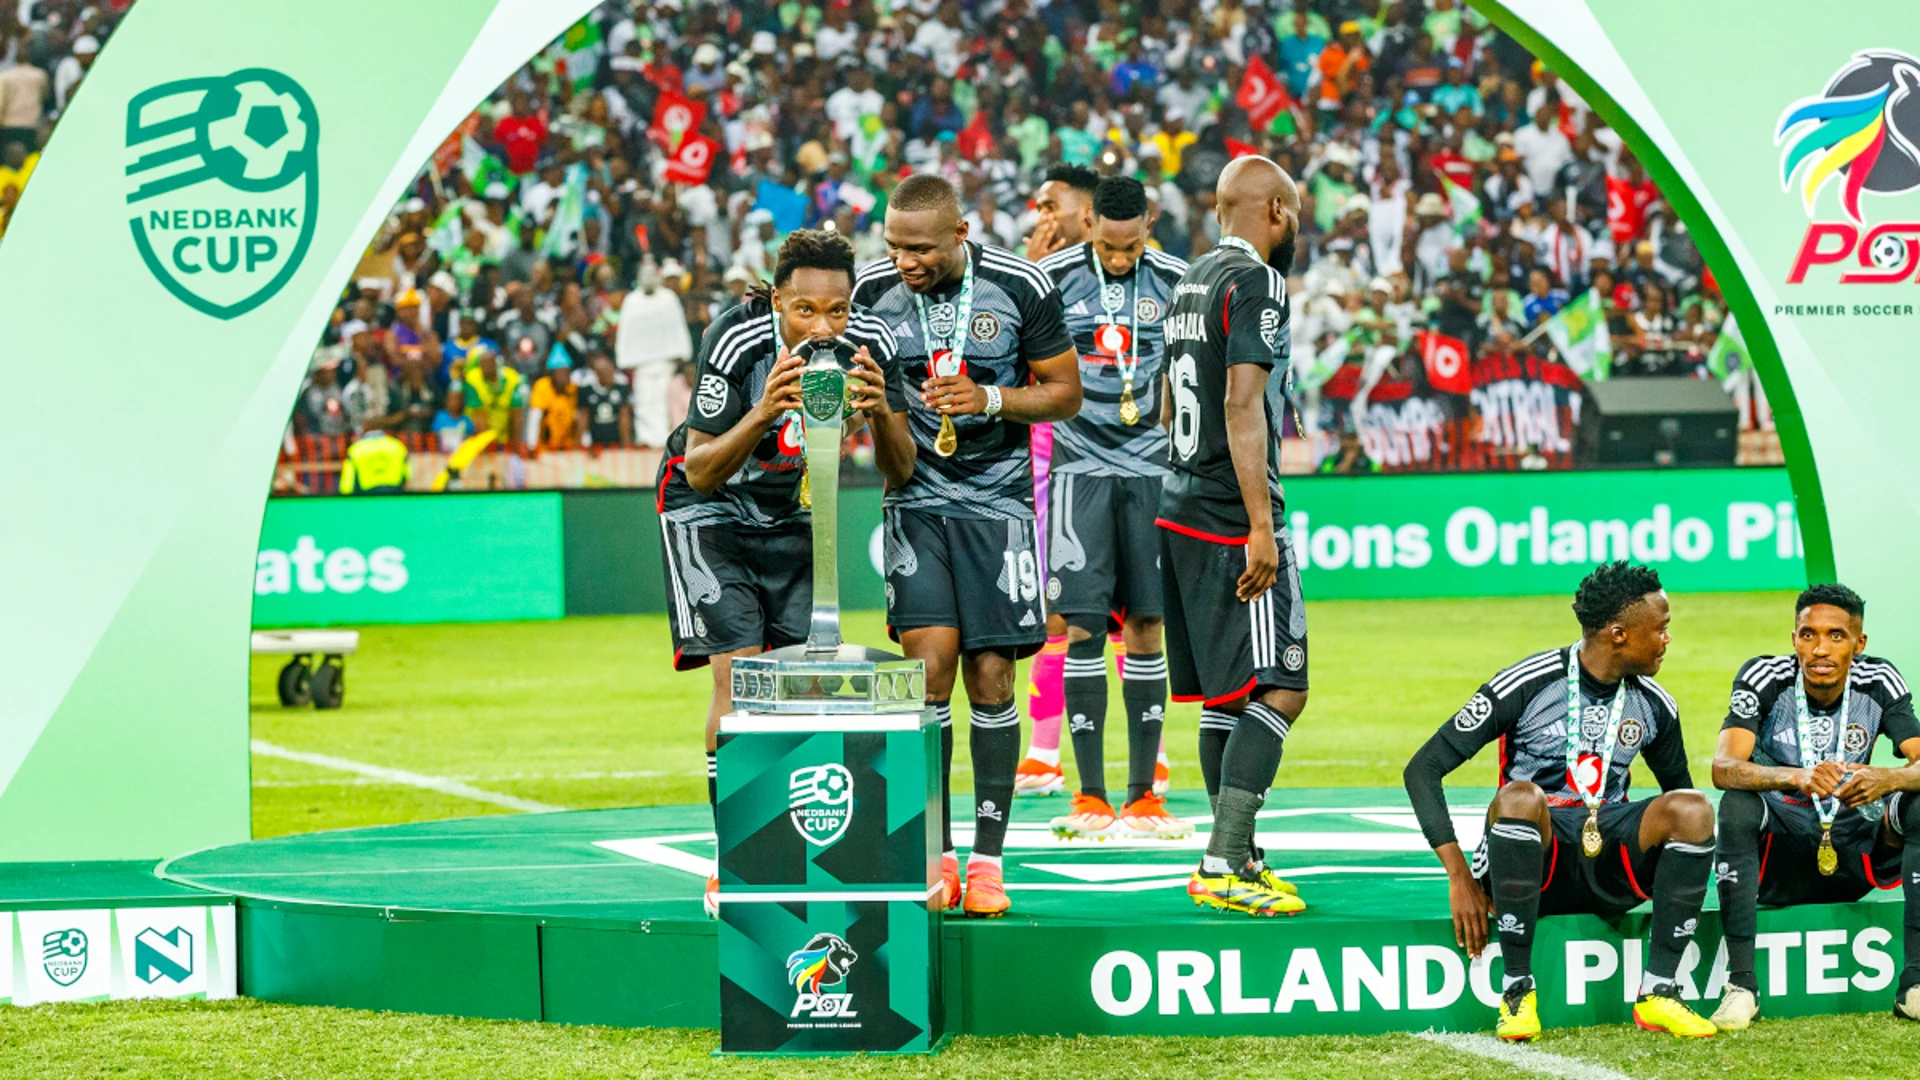 Pirates coach says team never gave up